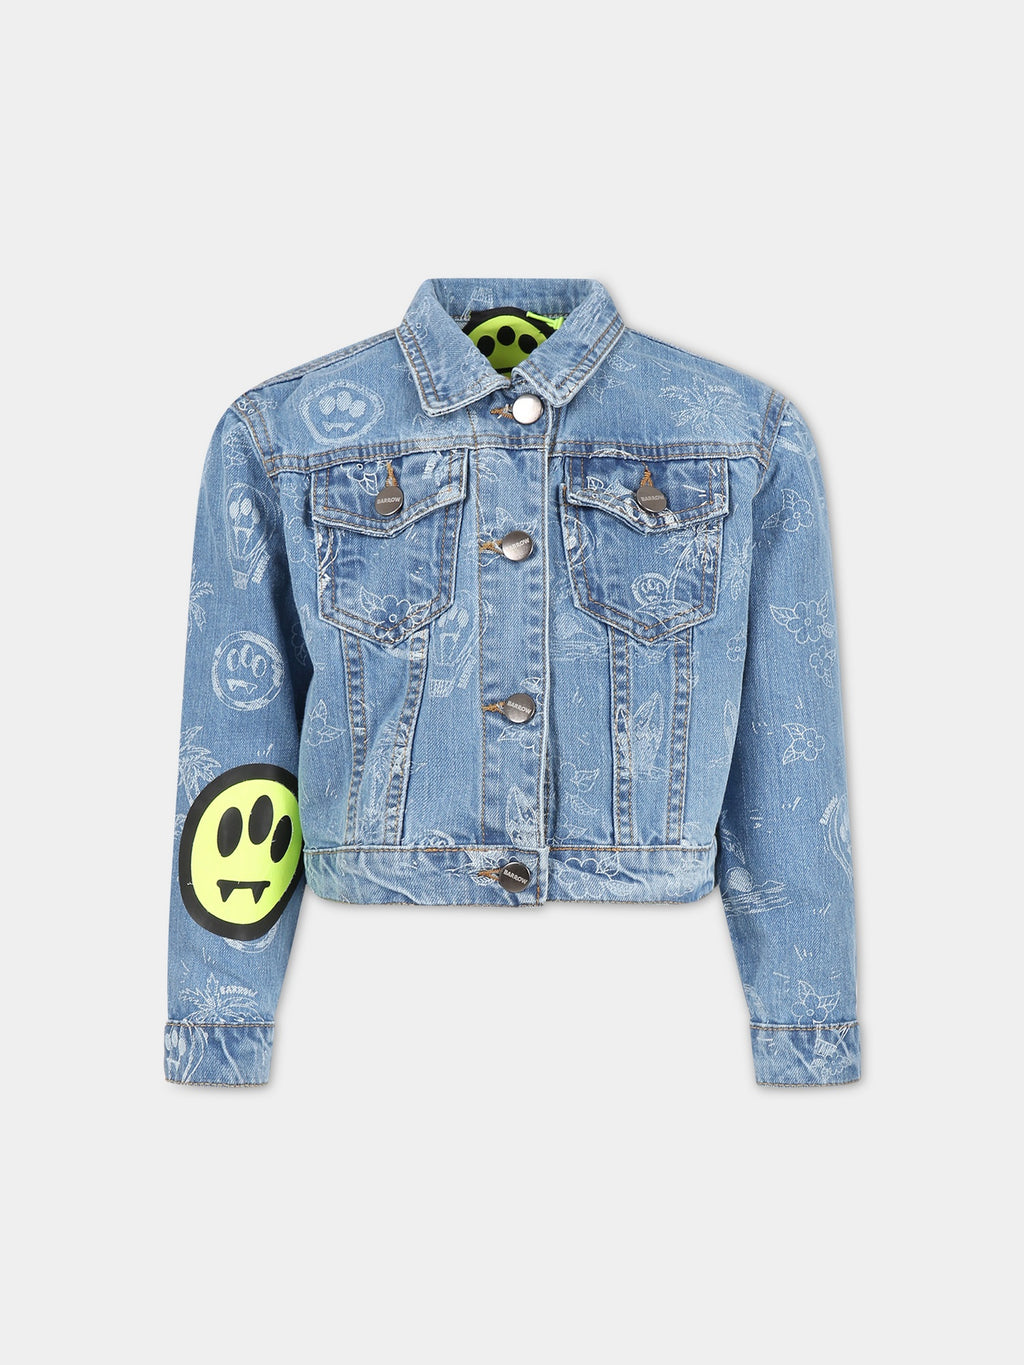 Light blue jacket for kids with iconic smiley